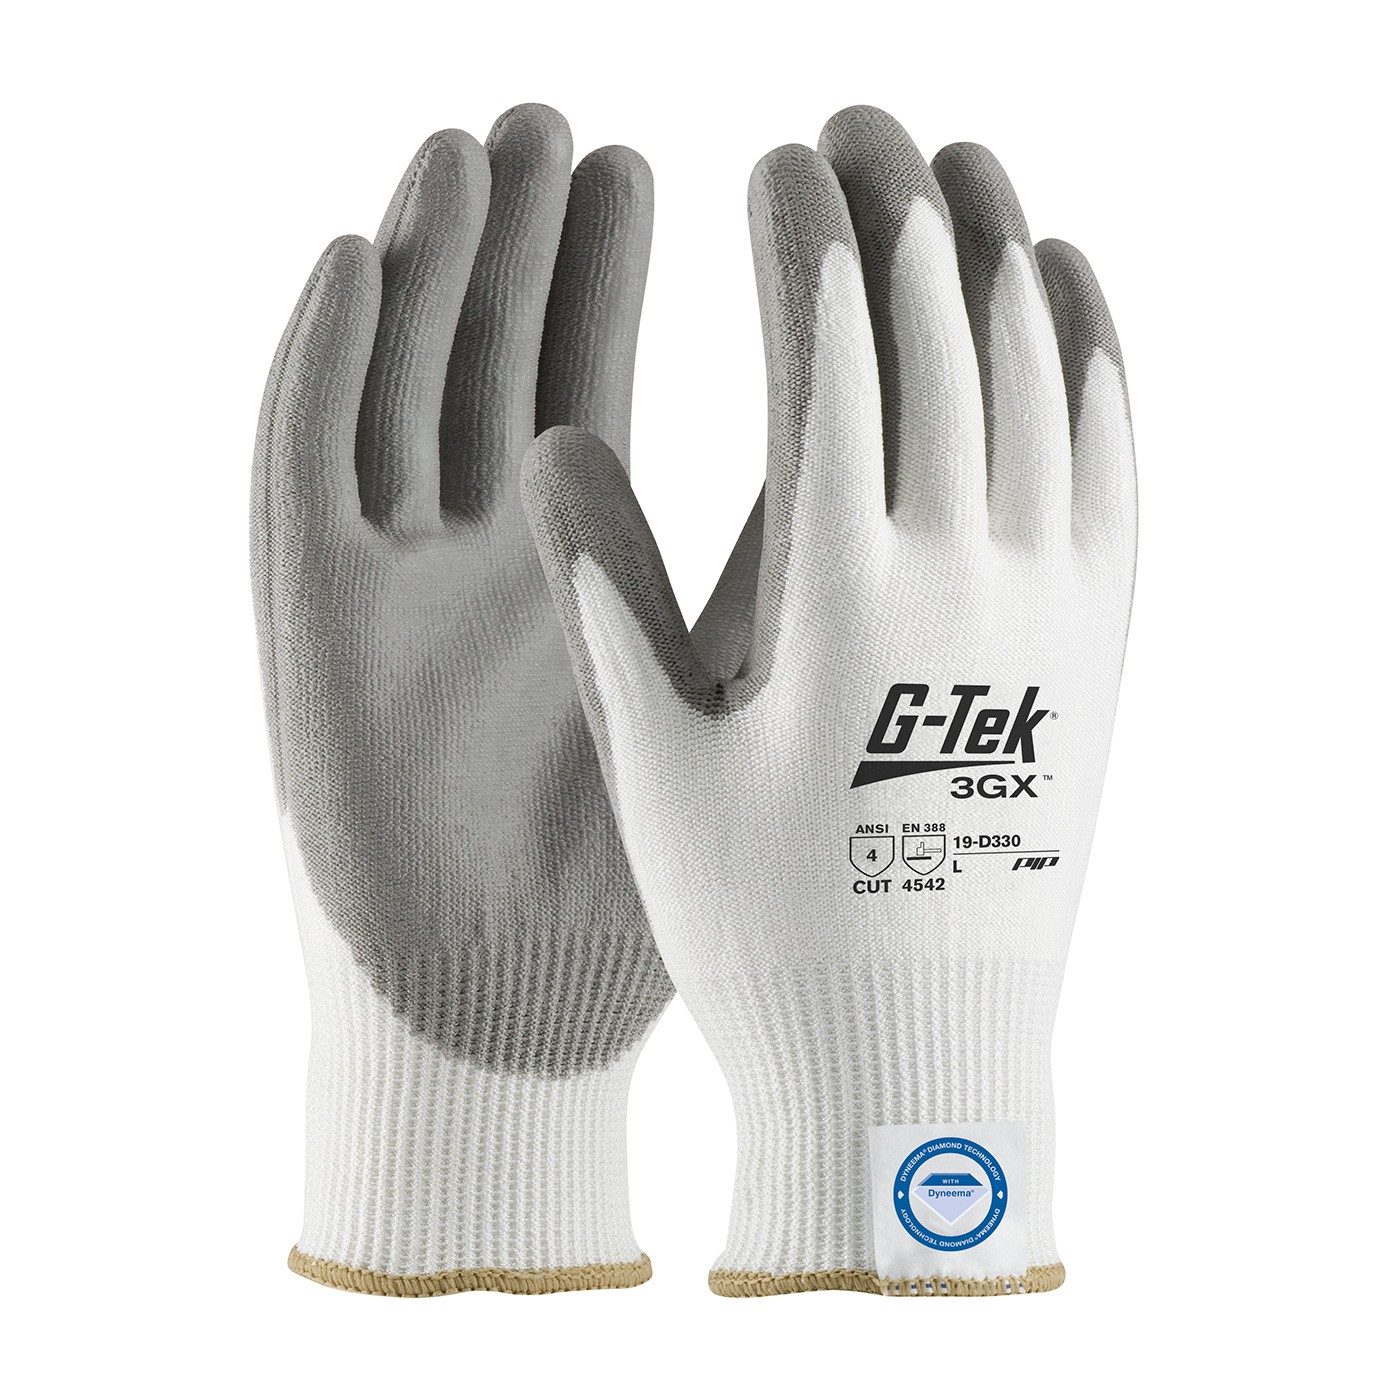 G-Tek® 3GX® Seamless Knit Dyneema® Diamond Blended Glove with Polyurethane Coated Smooth Grip on Palm & Fingers  (#19-D330)